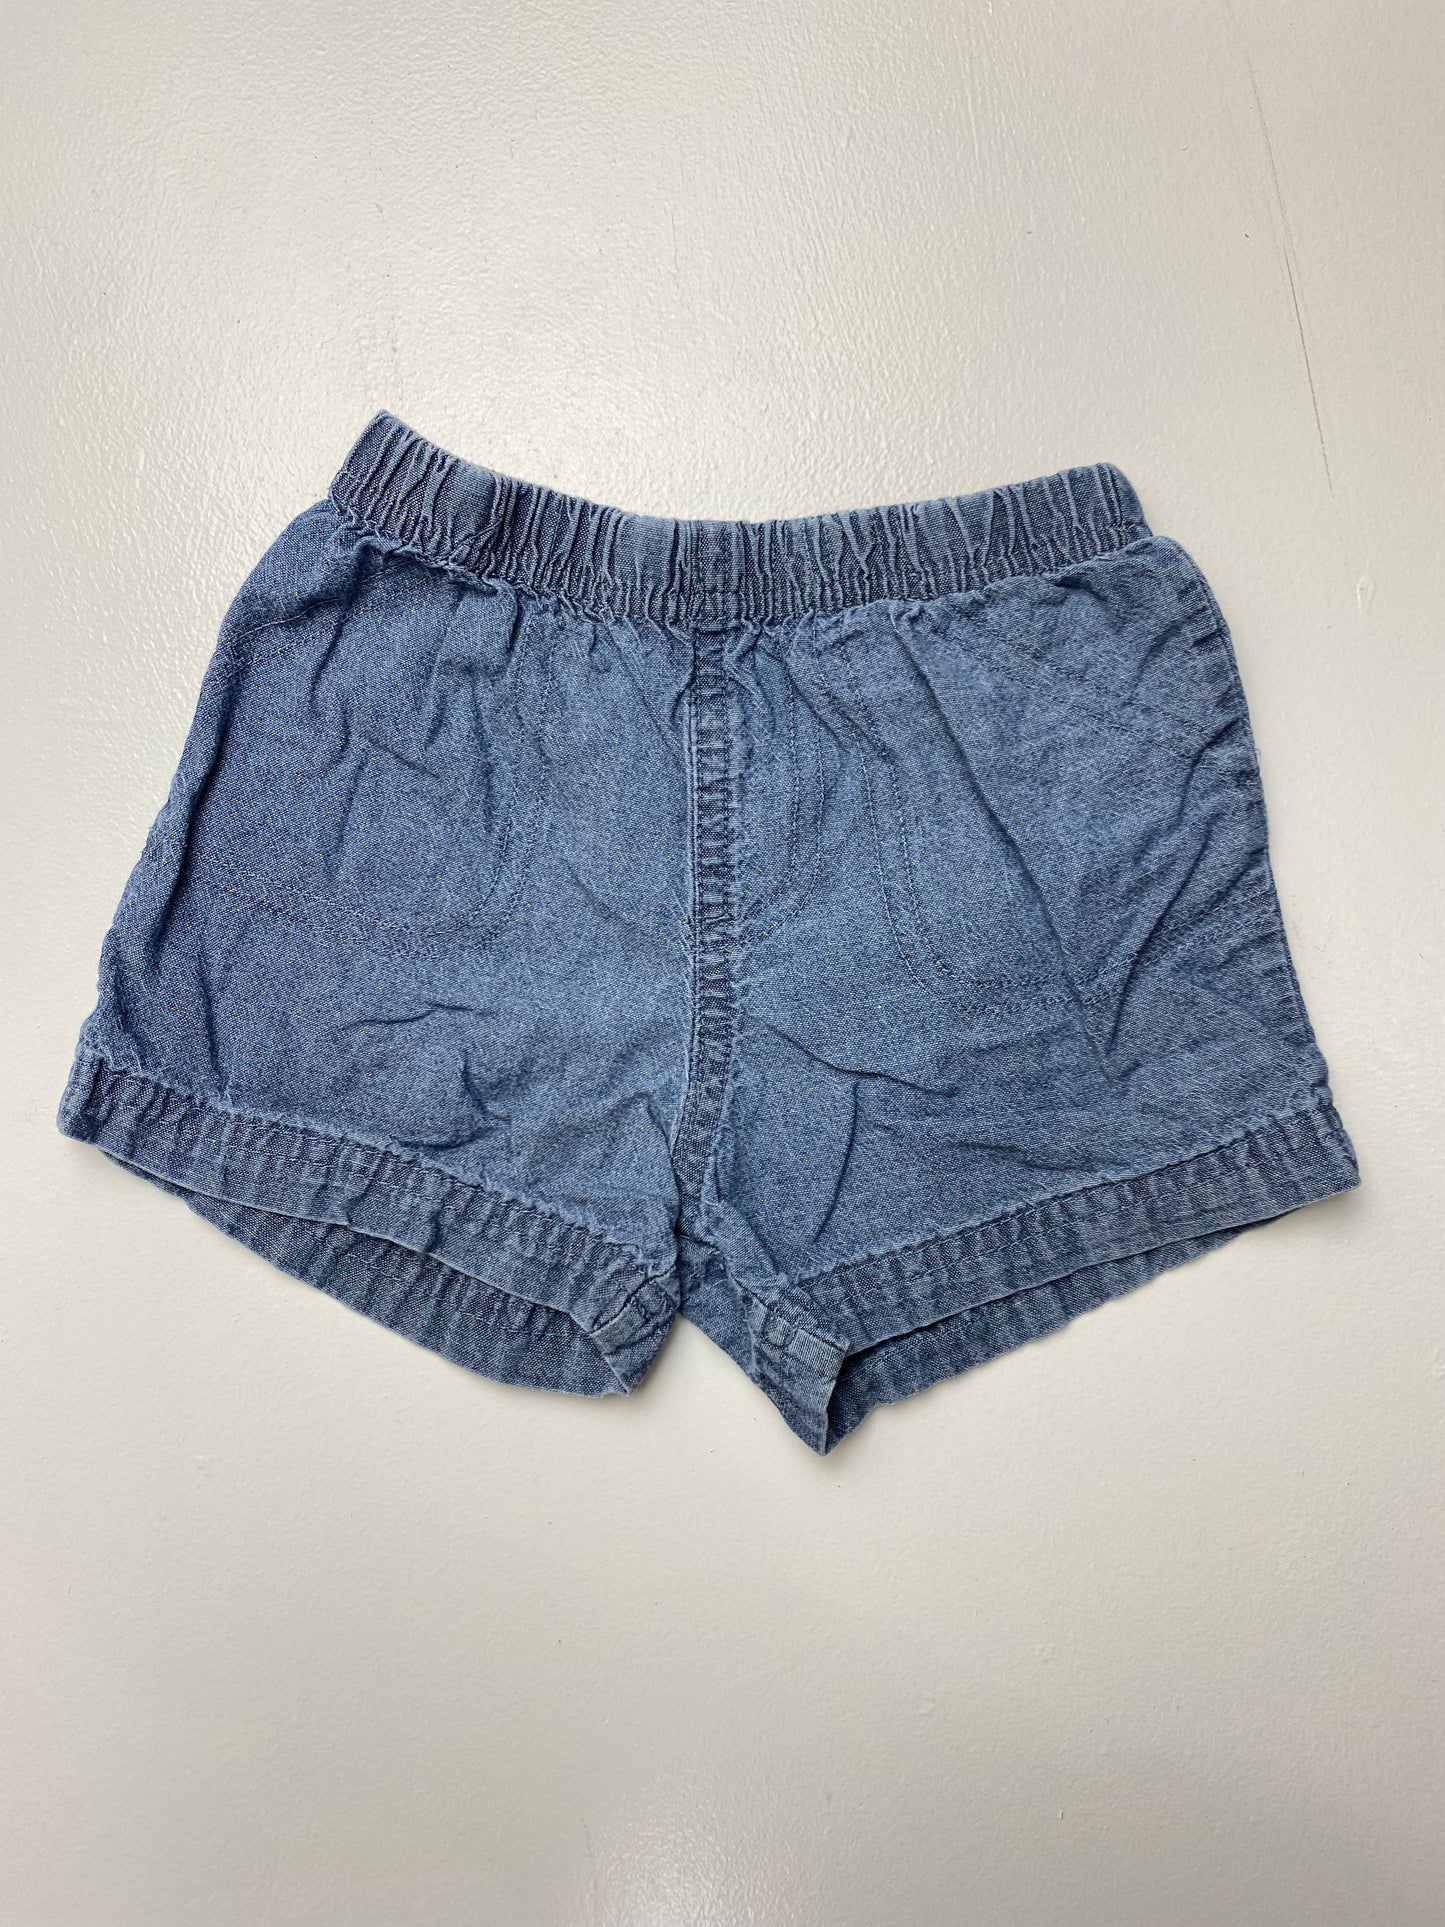 Carter's Chambray Pull-On Shorts 12M